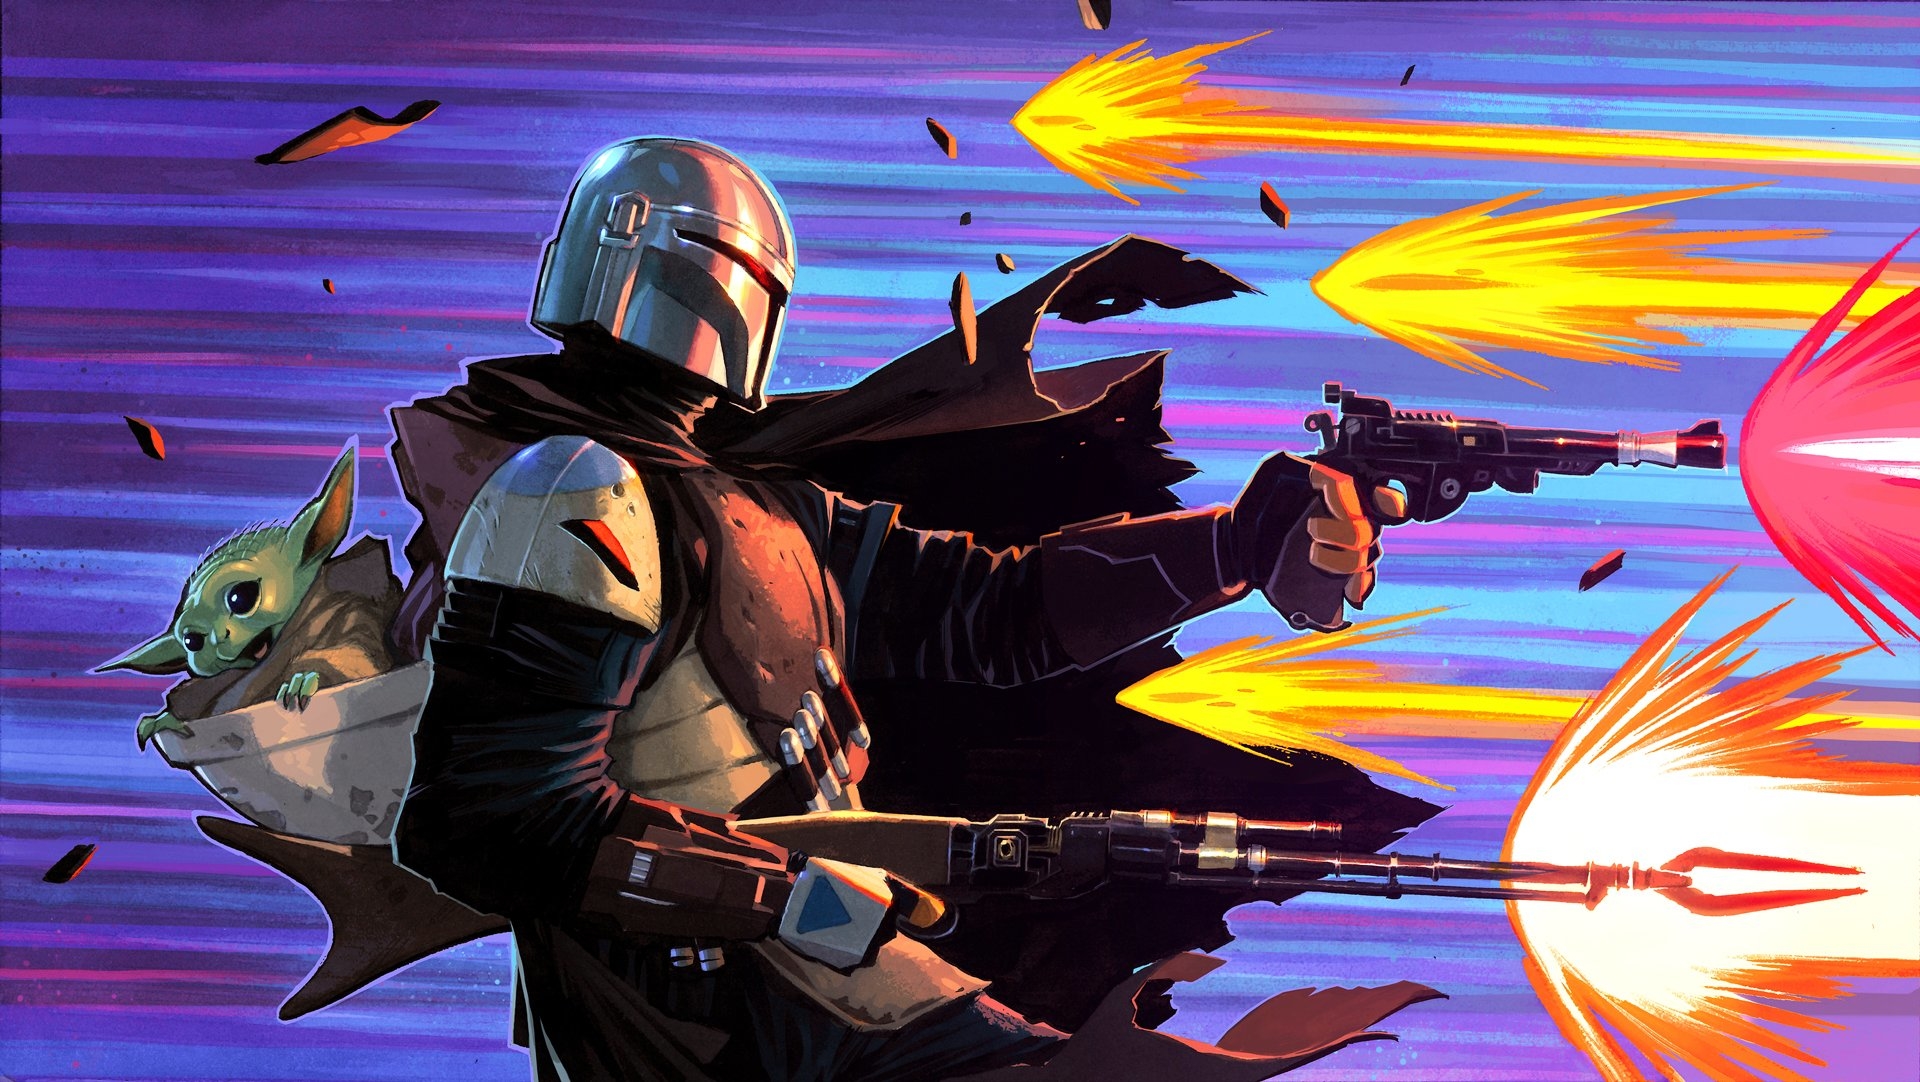 Mandalorian And Baby Yoda Fortnite Digital Art Wallpaper Hd Games 4k Wallpapers Images Photos And Background Wallpapers Den